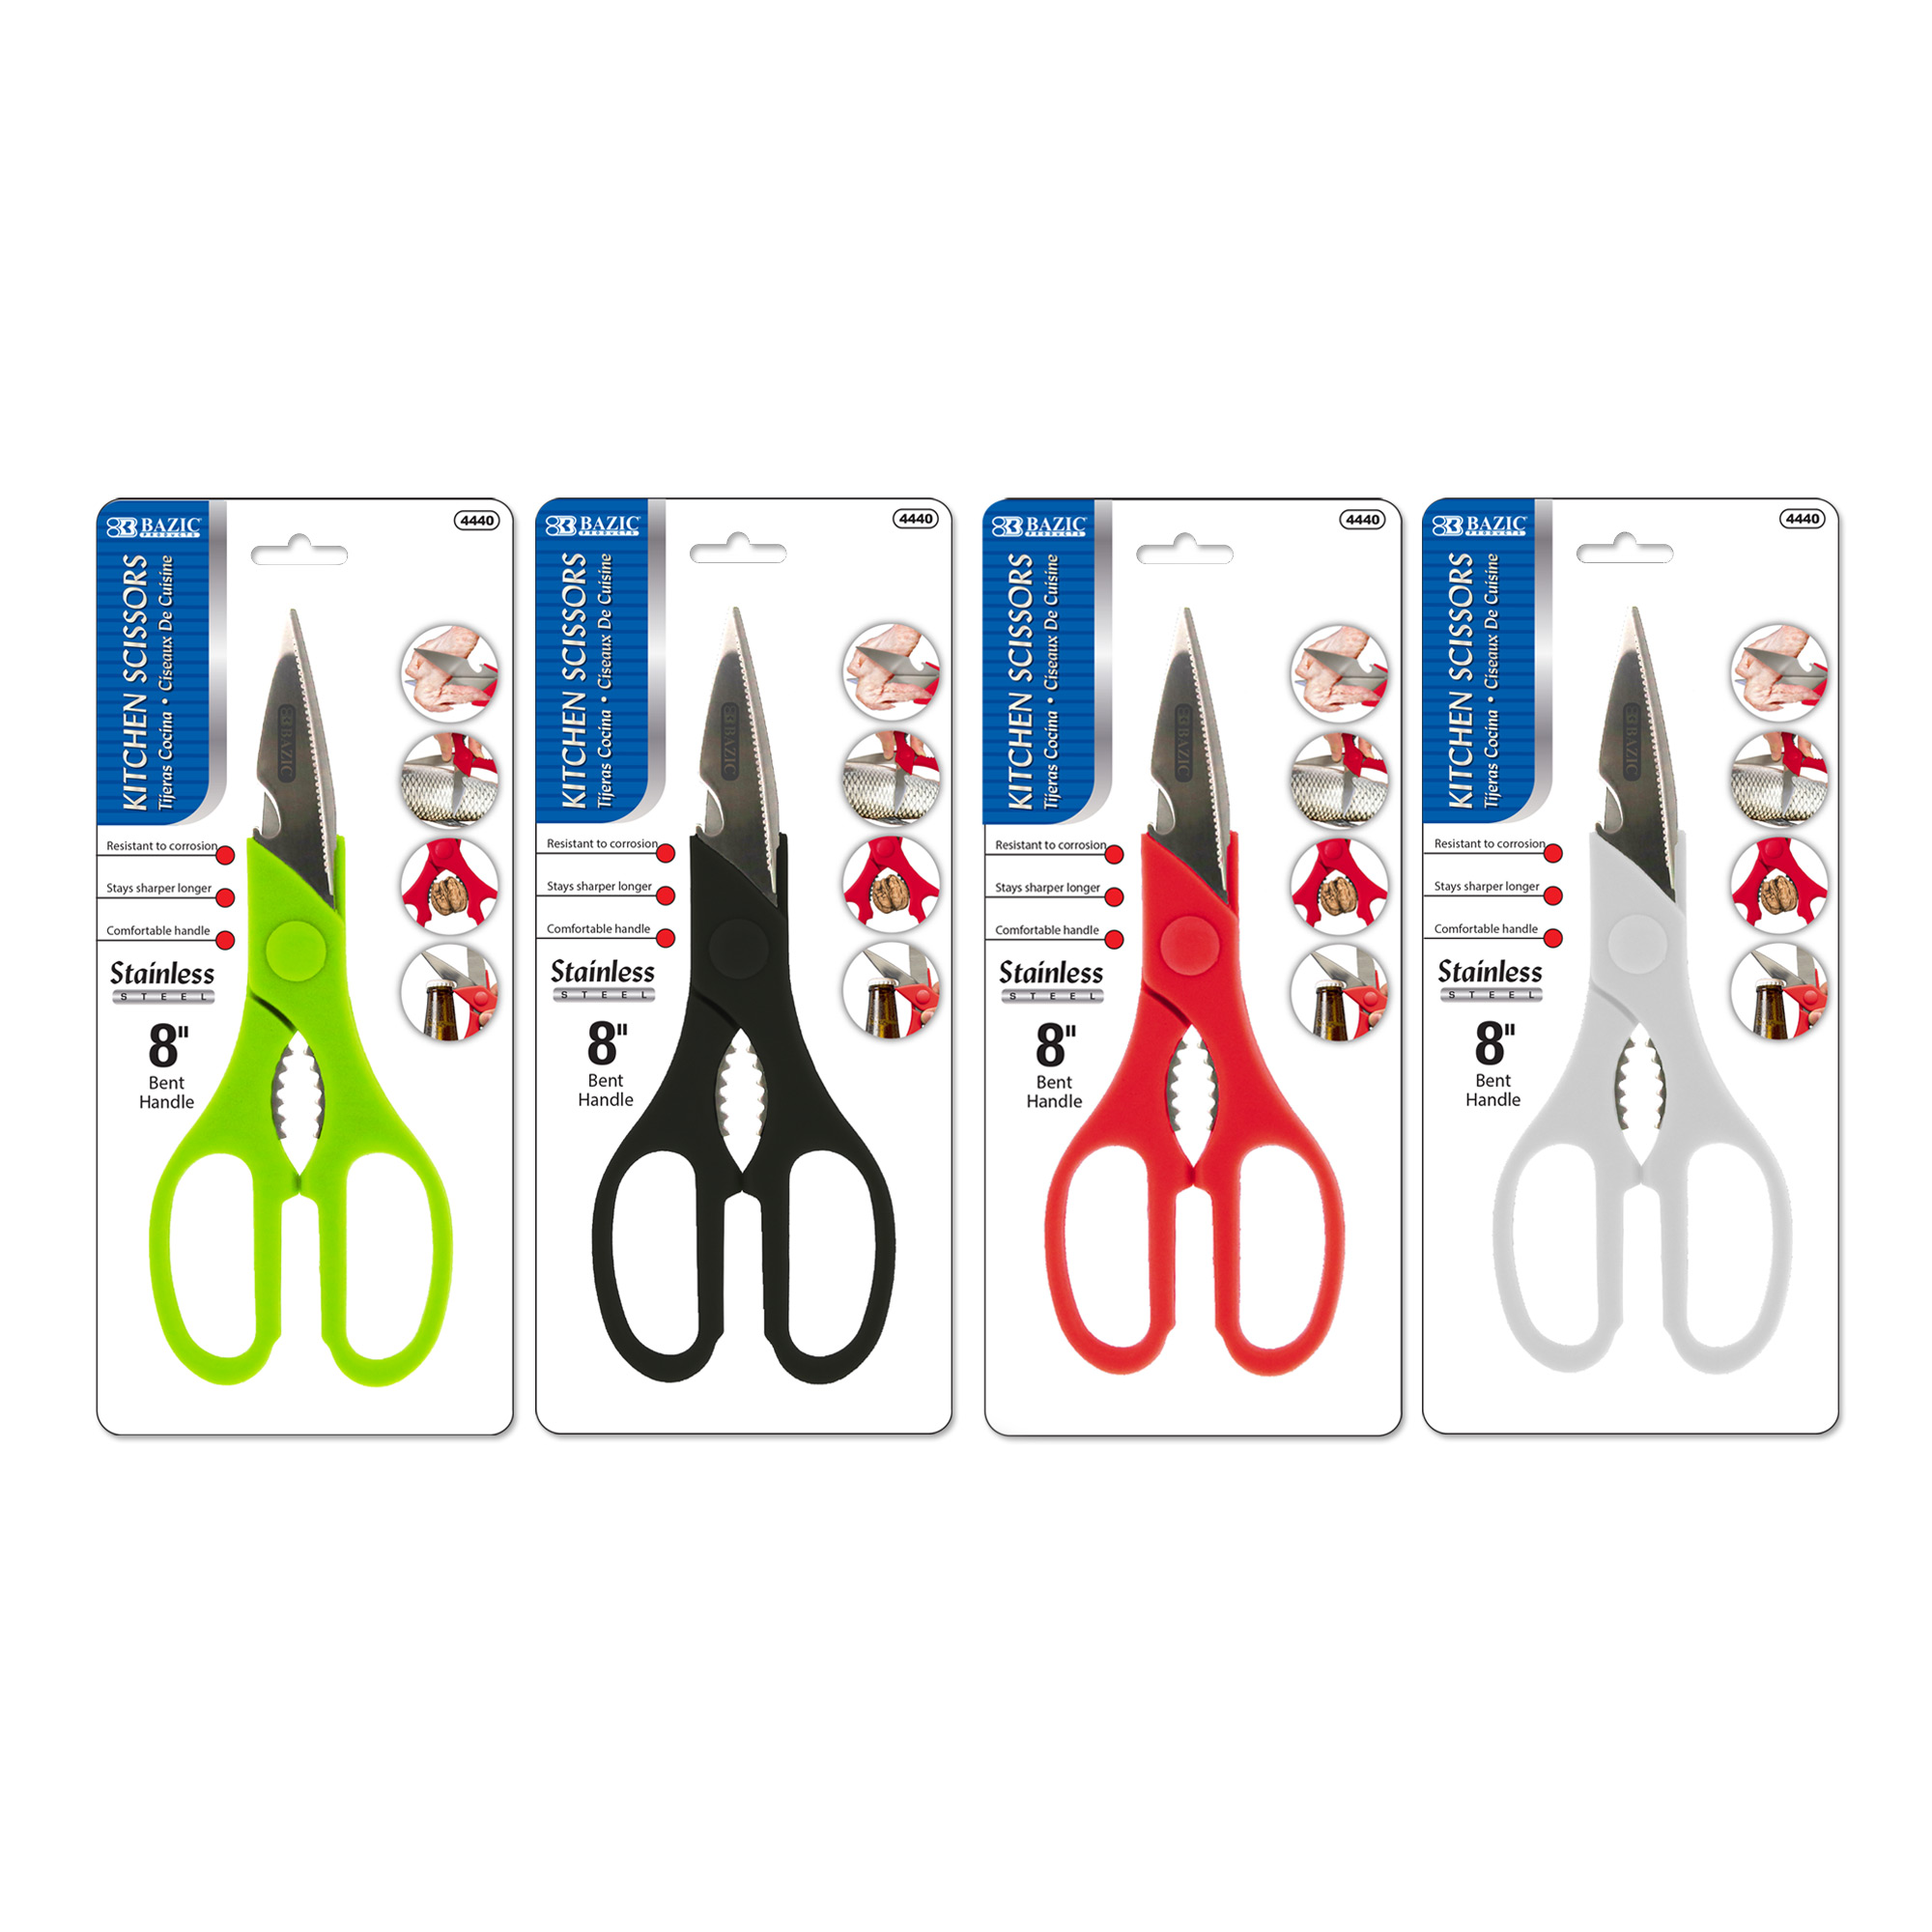 Bazic Products Bazic 8 Classic Left Handed Bent Stainless Steel Scissors / Box Qty - 24